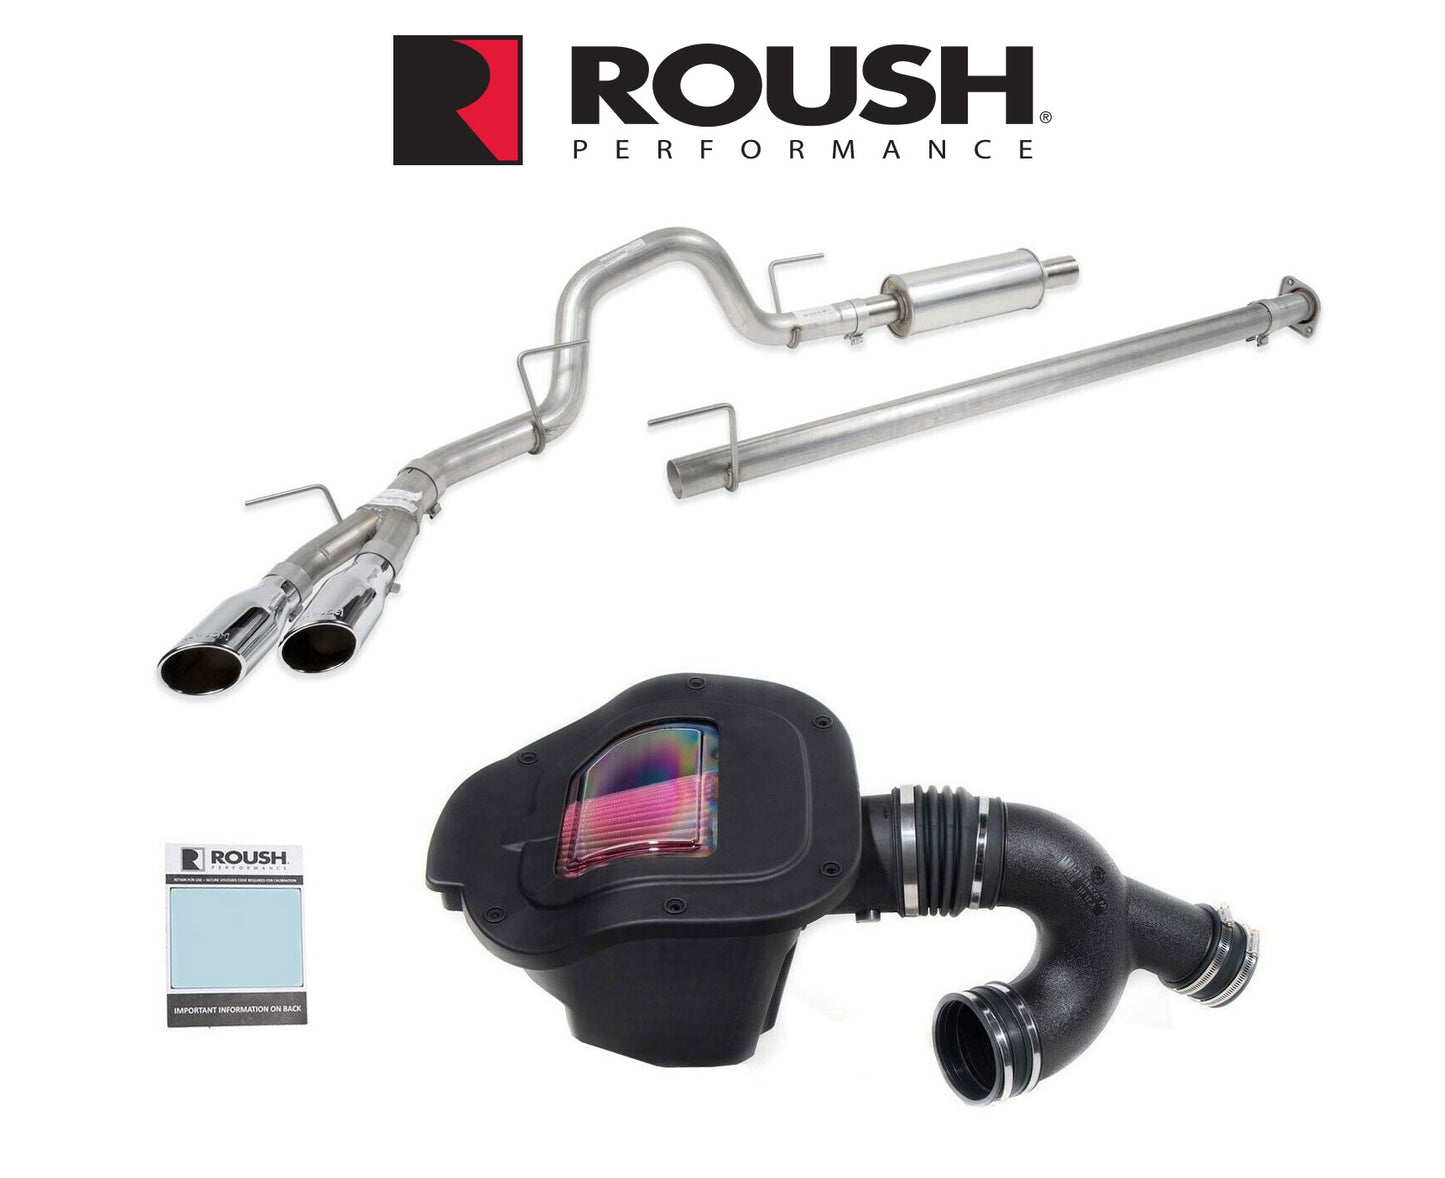 2019-2020 F150 3.5L Roush 422172 Exhaust & Cold Air Kit Performance Pac Level 2